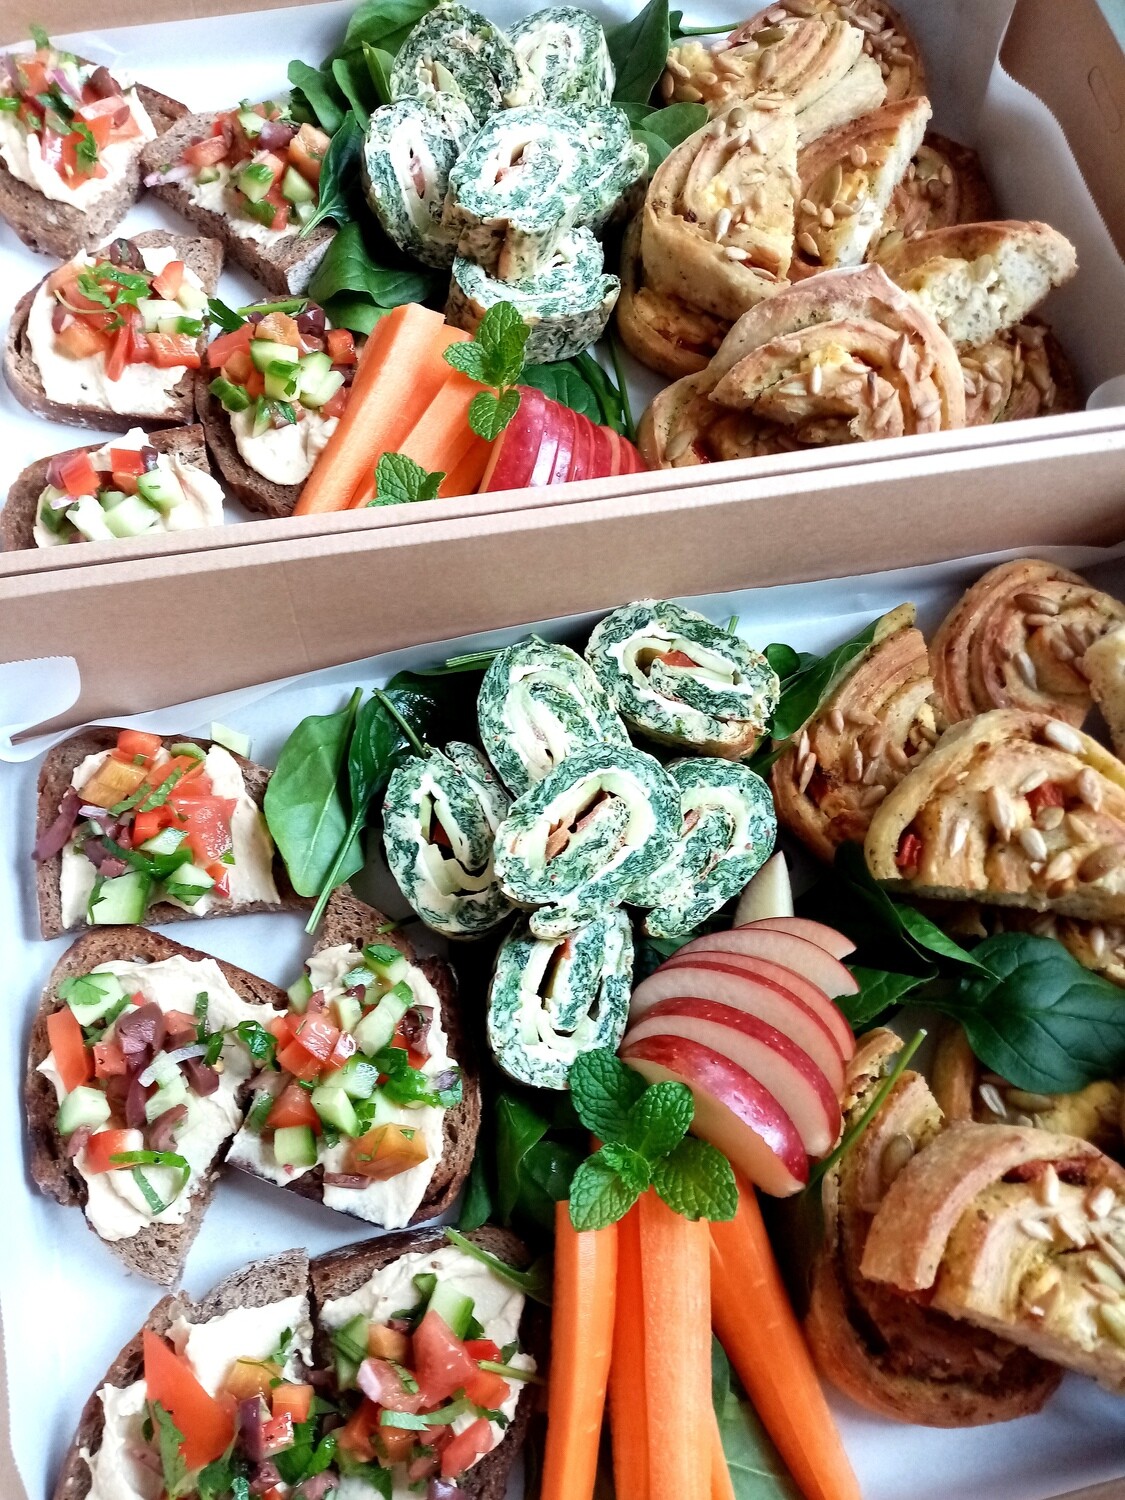 VEGETARIAN DELIGHT PLATTER for five people. With pesto scrolls, sourdough rye bruschetta, oven omelette roll. Requires two days notice please.